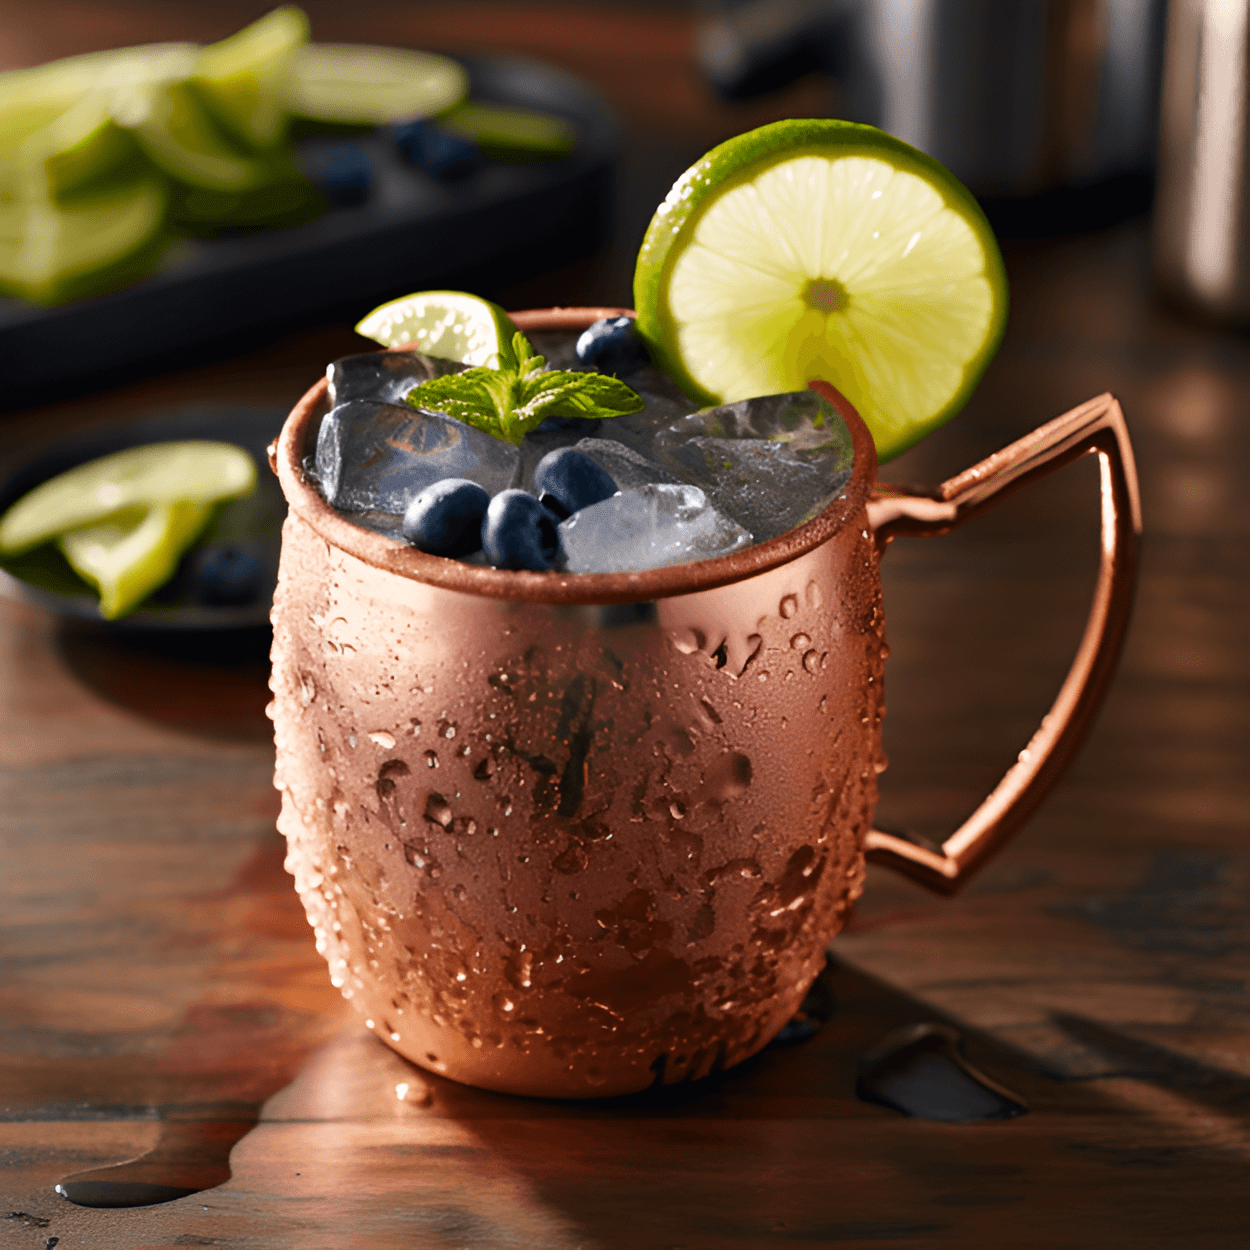 Blueberry Mule Cocktail Recipe - The Blueberry Mule is a refreshing blend of sweet, sour, and spicy. The fresh blueberries provide a sweet and slightly tart flavor, while the ginger beer adds a spicy kick. The lime juice adds a sour note, balancing out the sweetness of the blueberries.